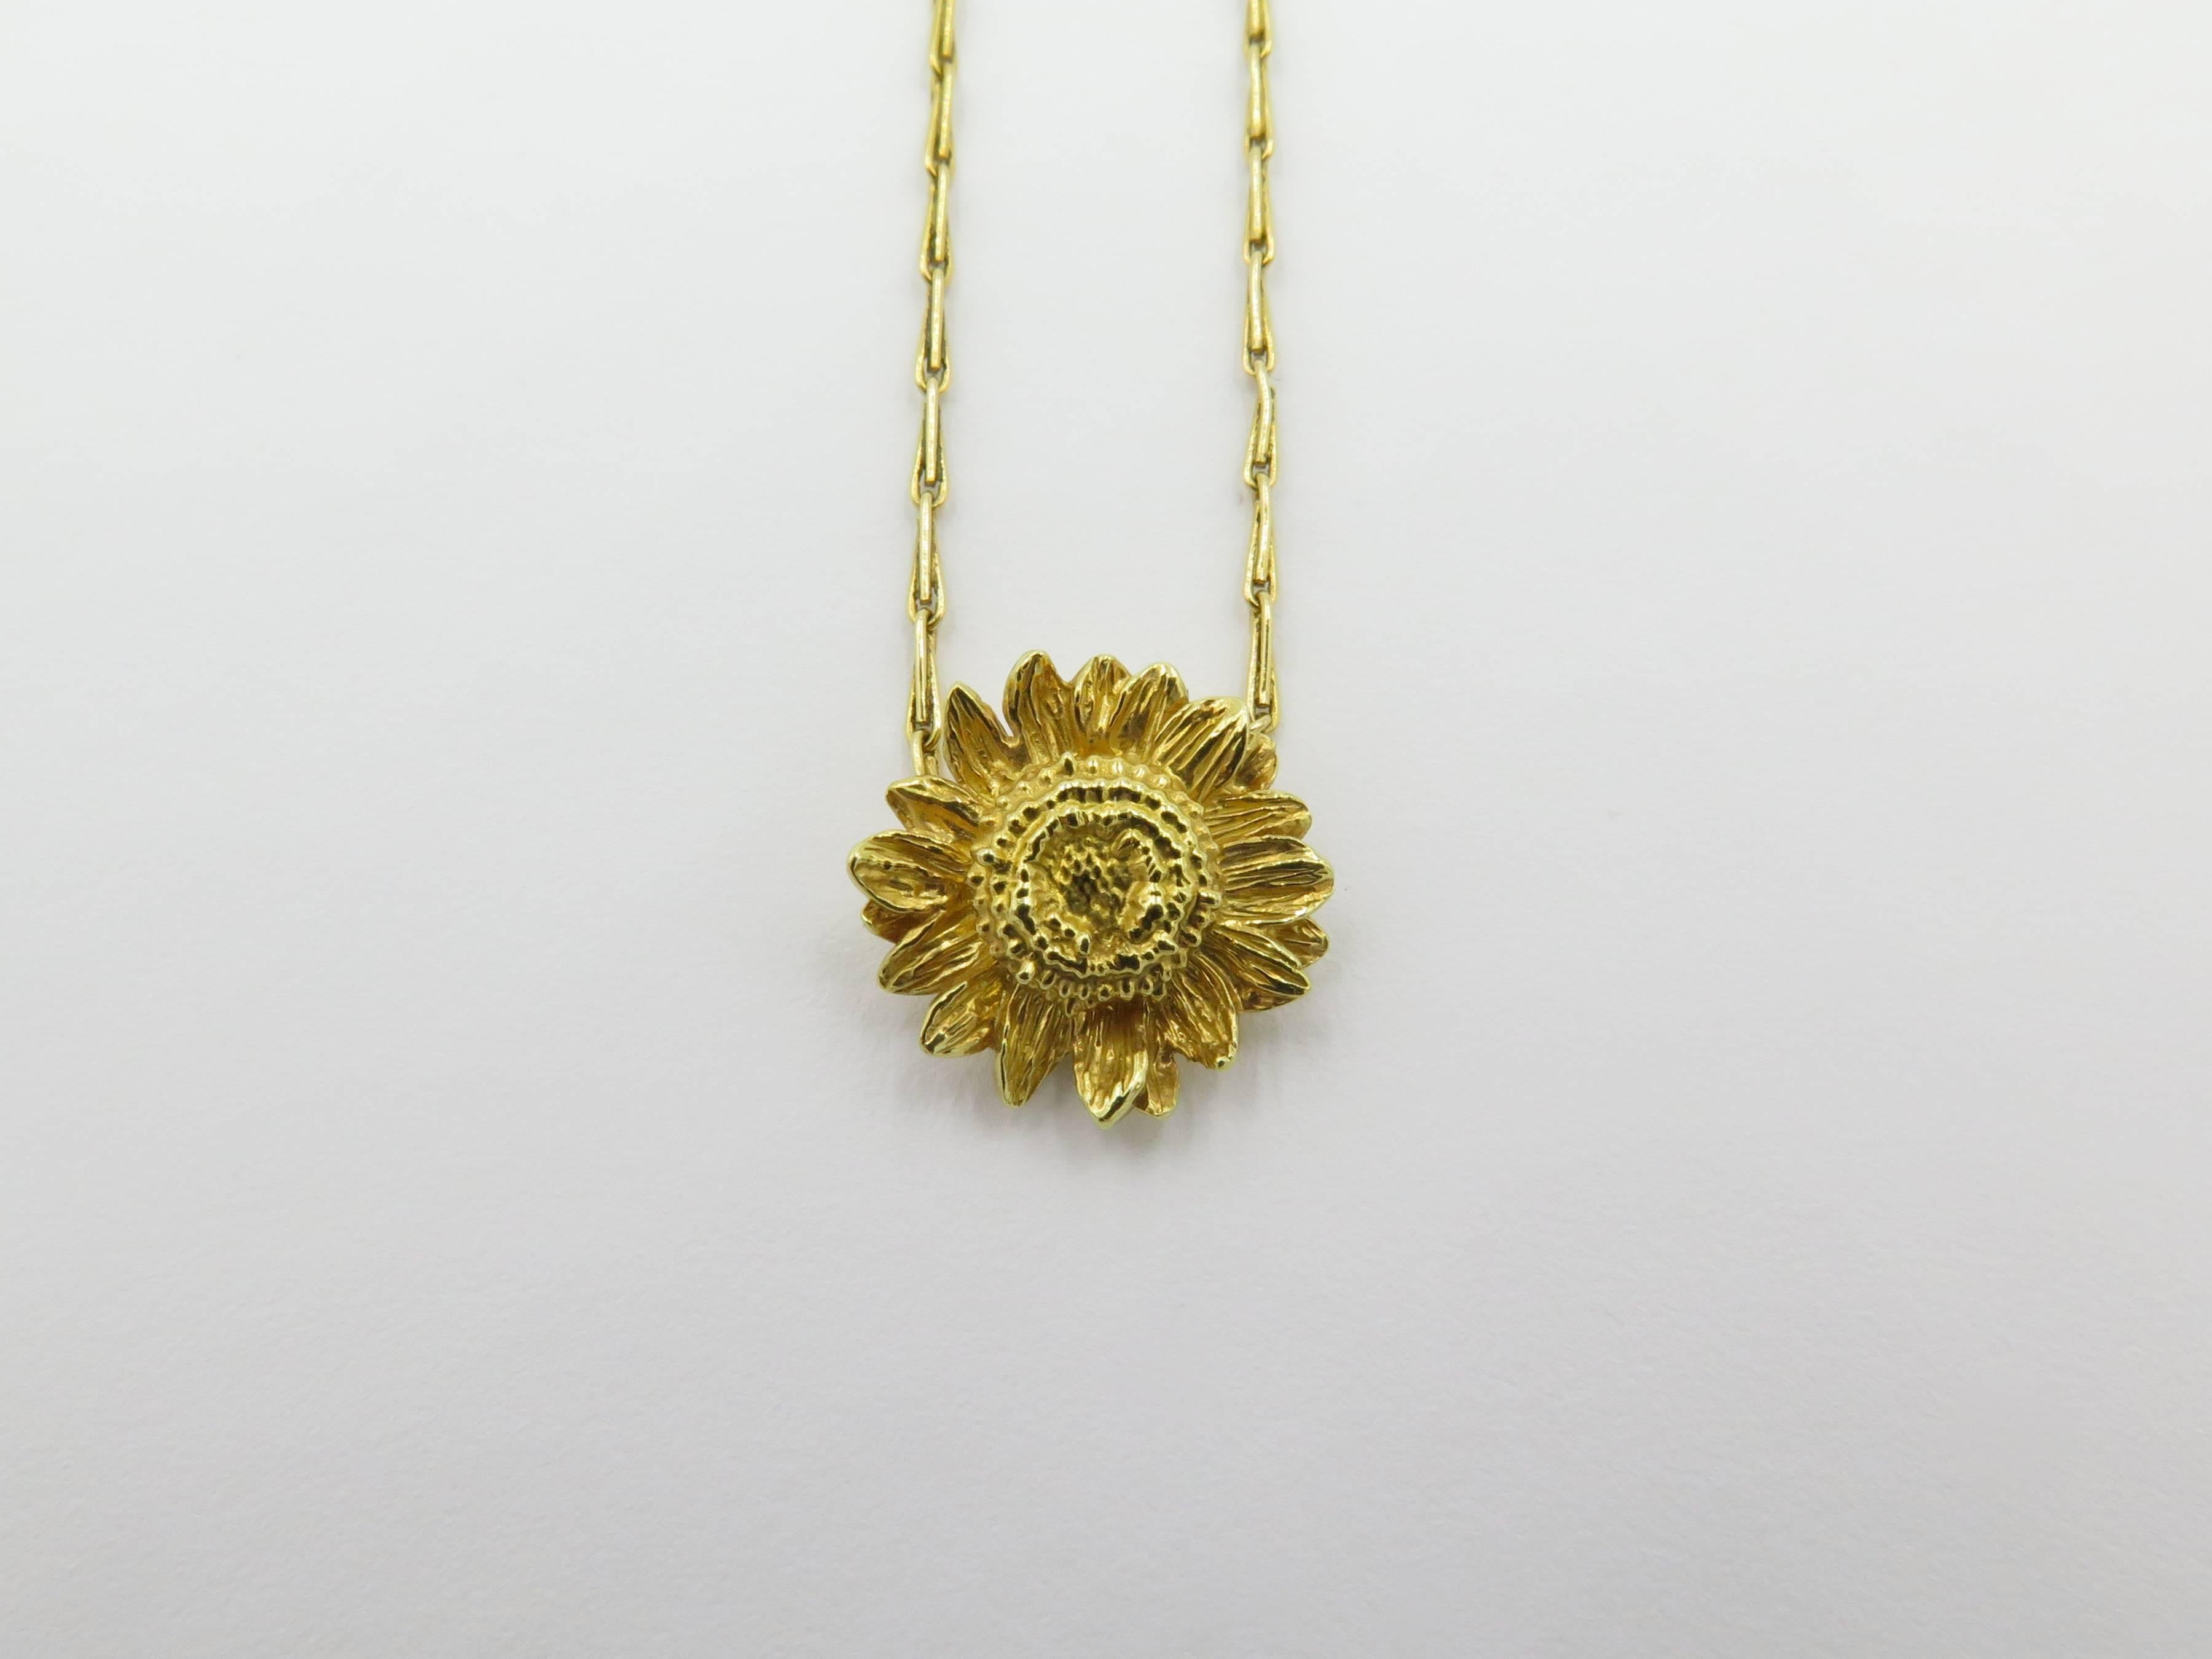 An 18 karat yellow gold necklace. Asprey. From the Sunflower collection. Designed as a fancy link chain, centering a textured gold sunflower, Diameter of sunflower is approximately 1/2 inch, length of chain is approximately 16 inches. Gross weight